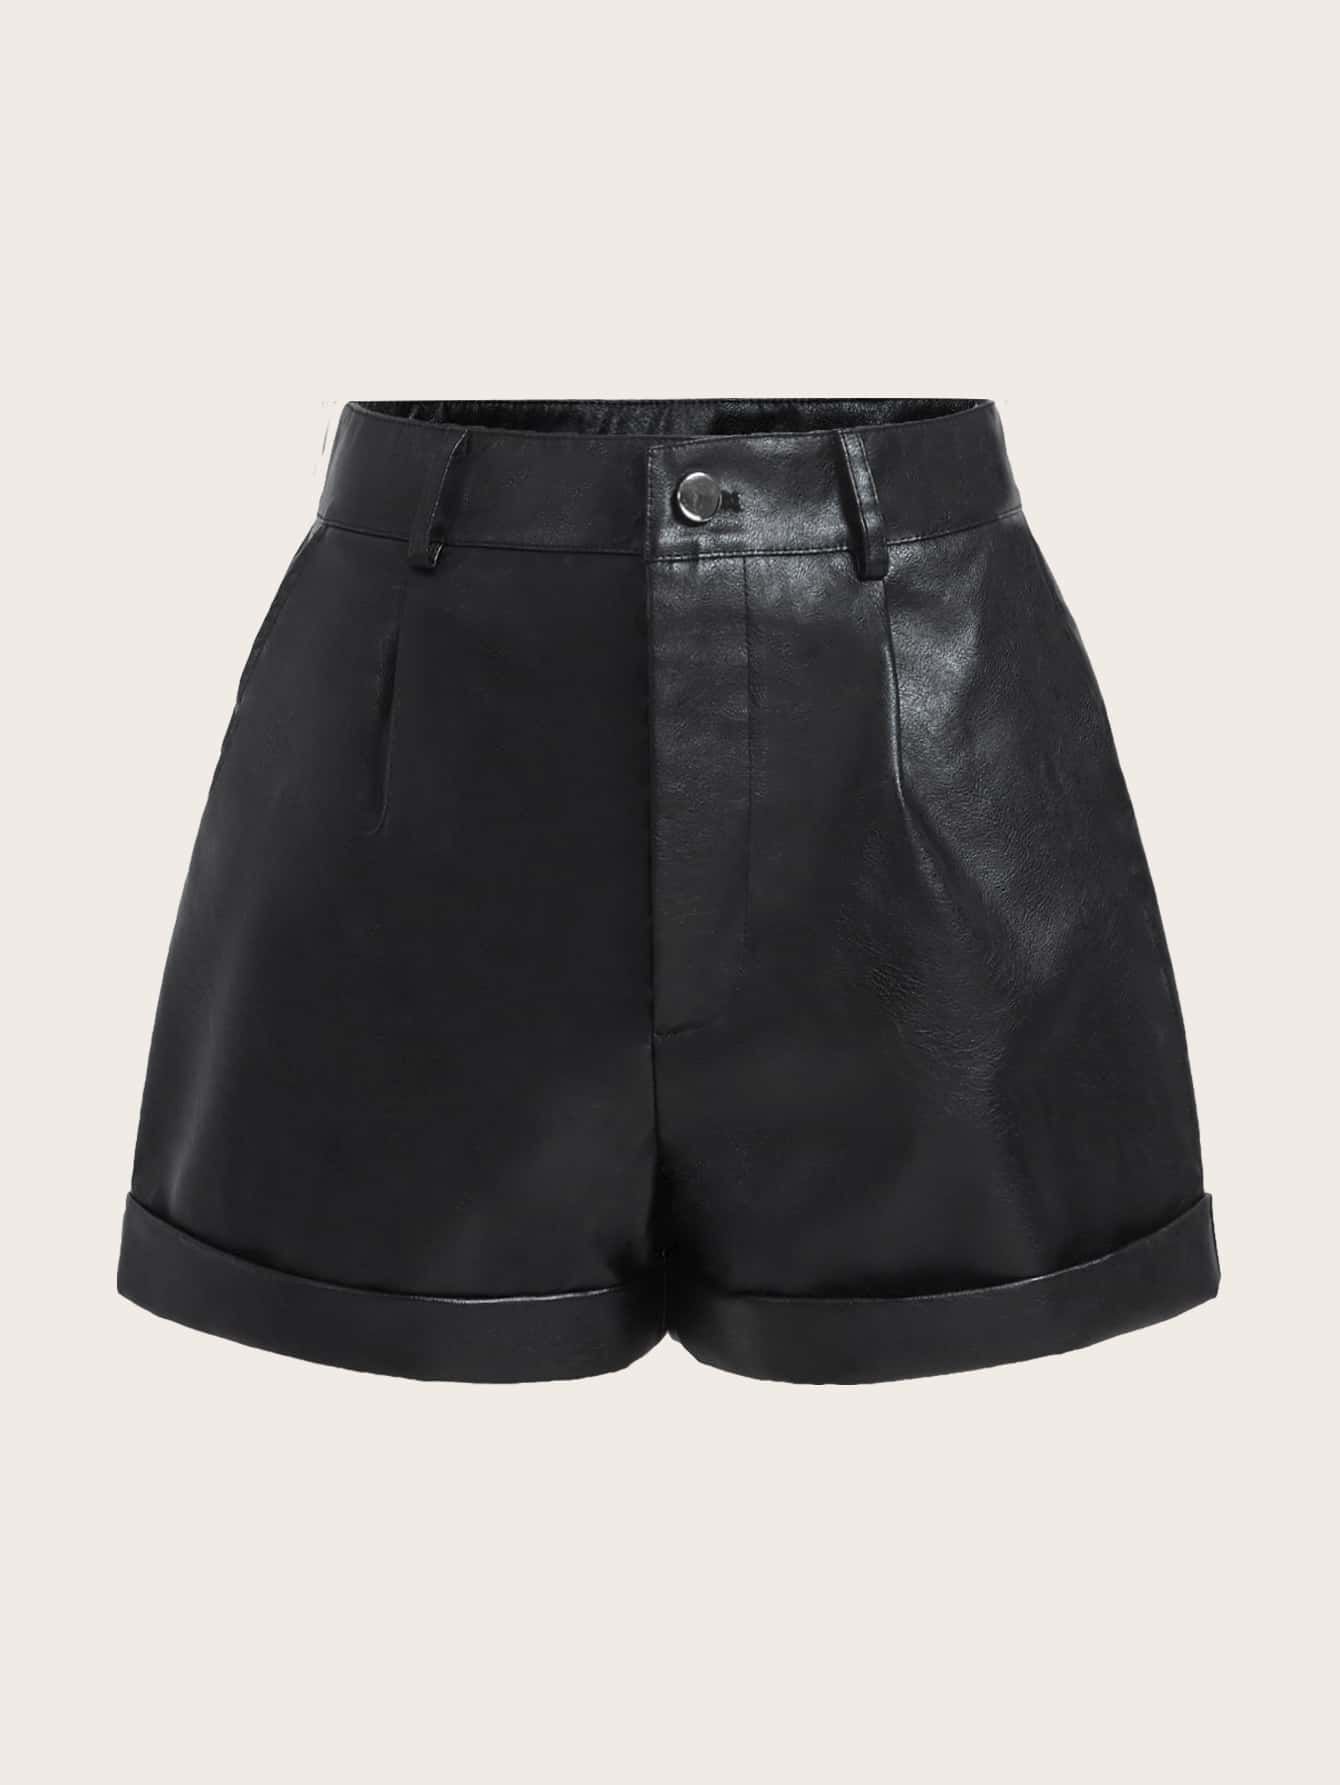 Top 15 Black Leather Shorts Outfit Ideas for Ladies: Style Guide